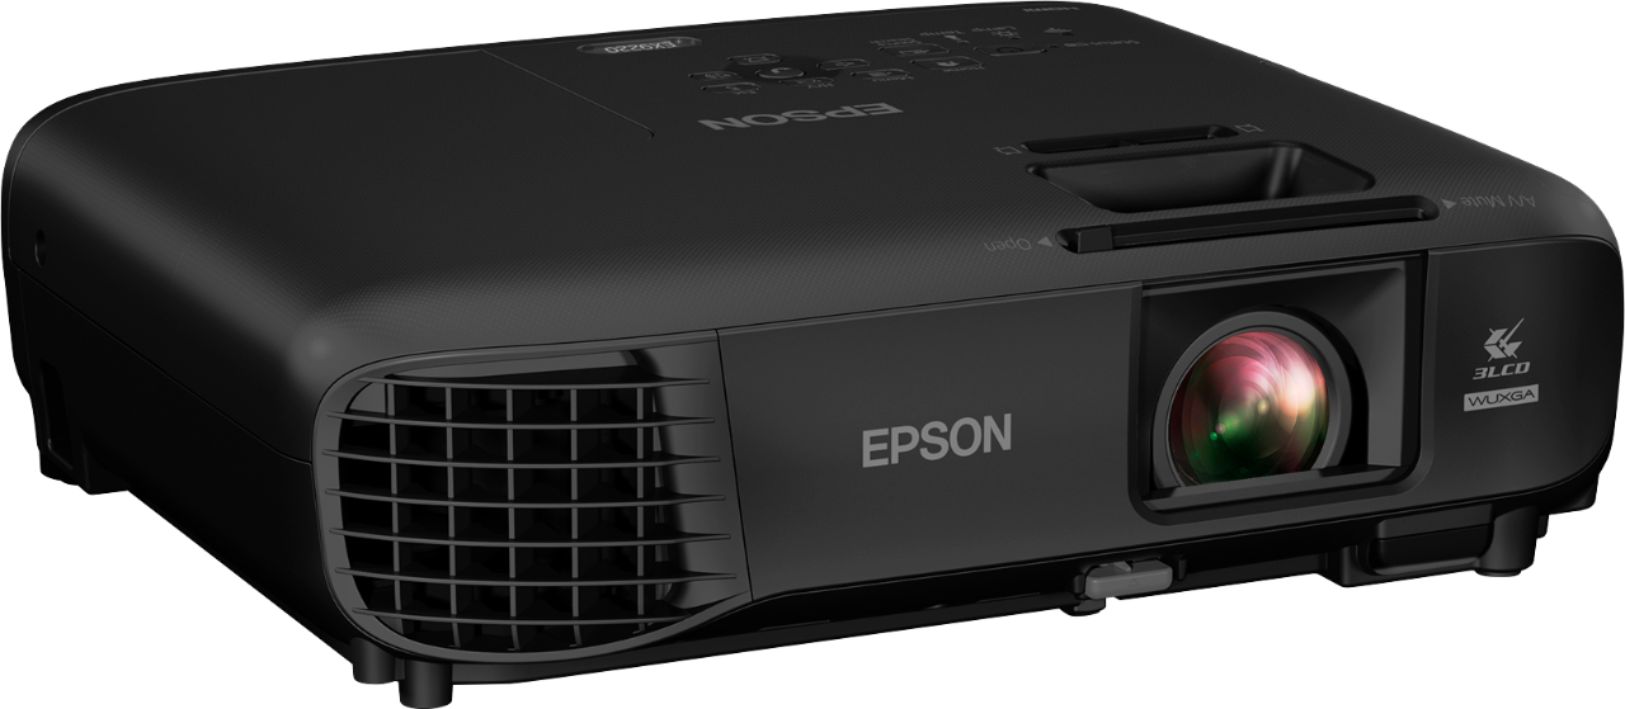 Angle View: Epson - T410 Multipack Standard Capacity Ink Cartridges - Cyan/Magenta/Yellow/Photo Black